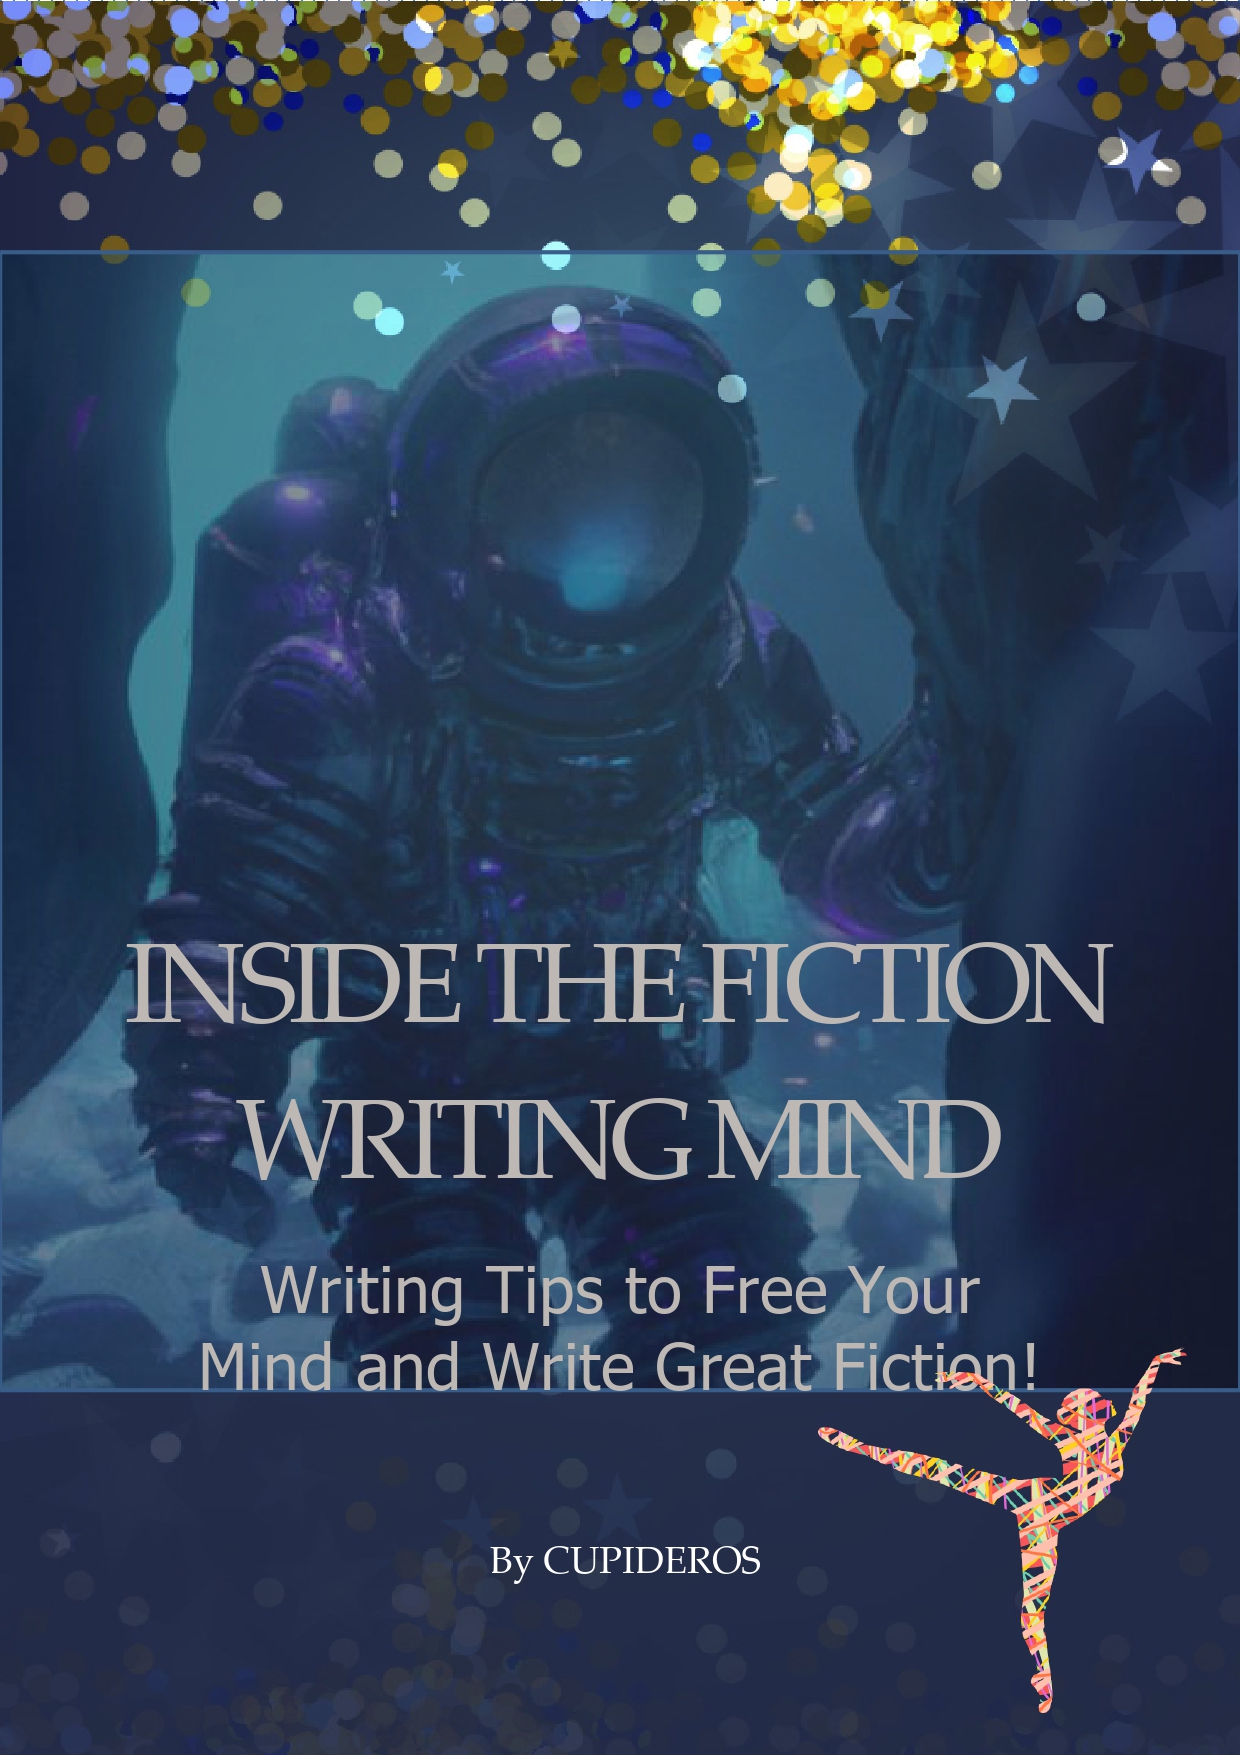 Inside the Fiction Writing Mind by Cupideros